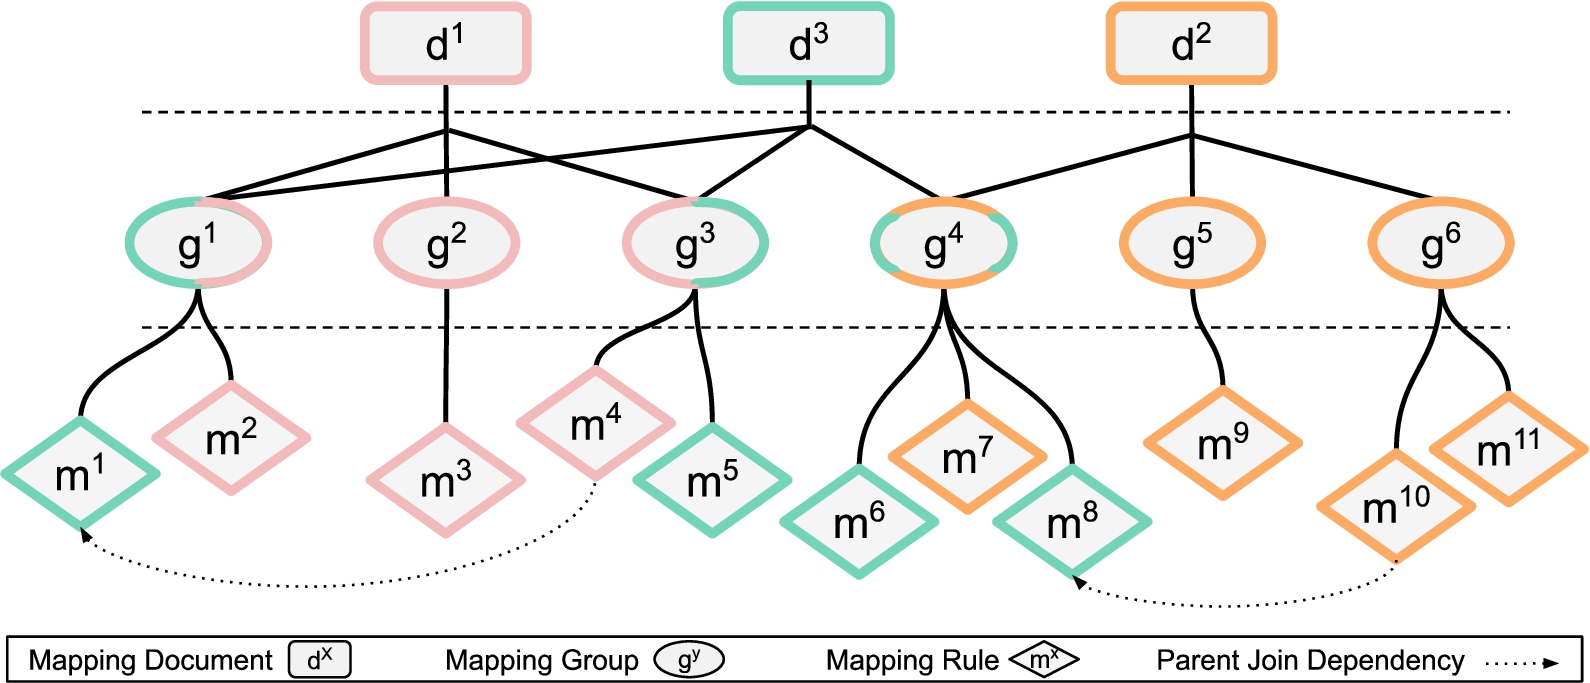 Mapping Partition. Mapping partition of three mapping documents with eleven normalized mapping rules in total. The mapping partition is composed of six mapping groups, which have between one and three mapping rules. In addition, there are two join dependencies among different groups of mappings.